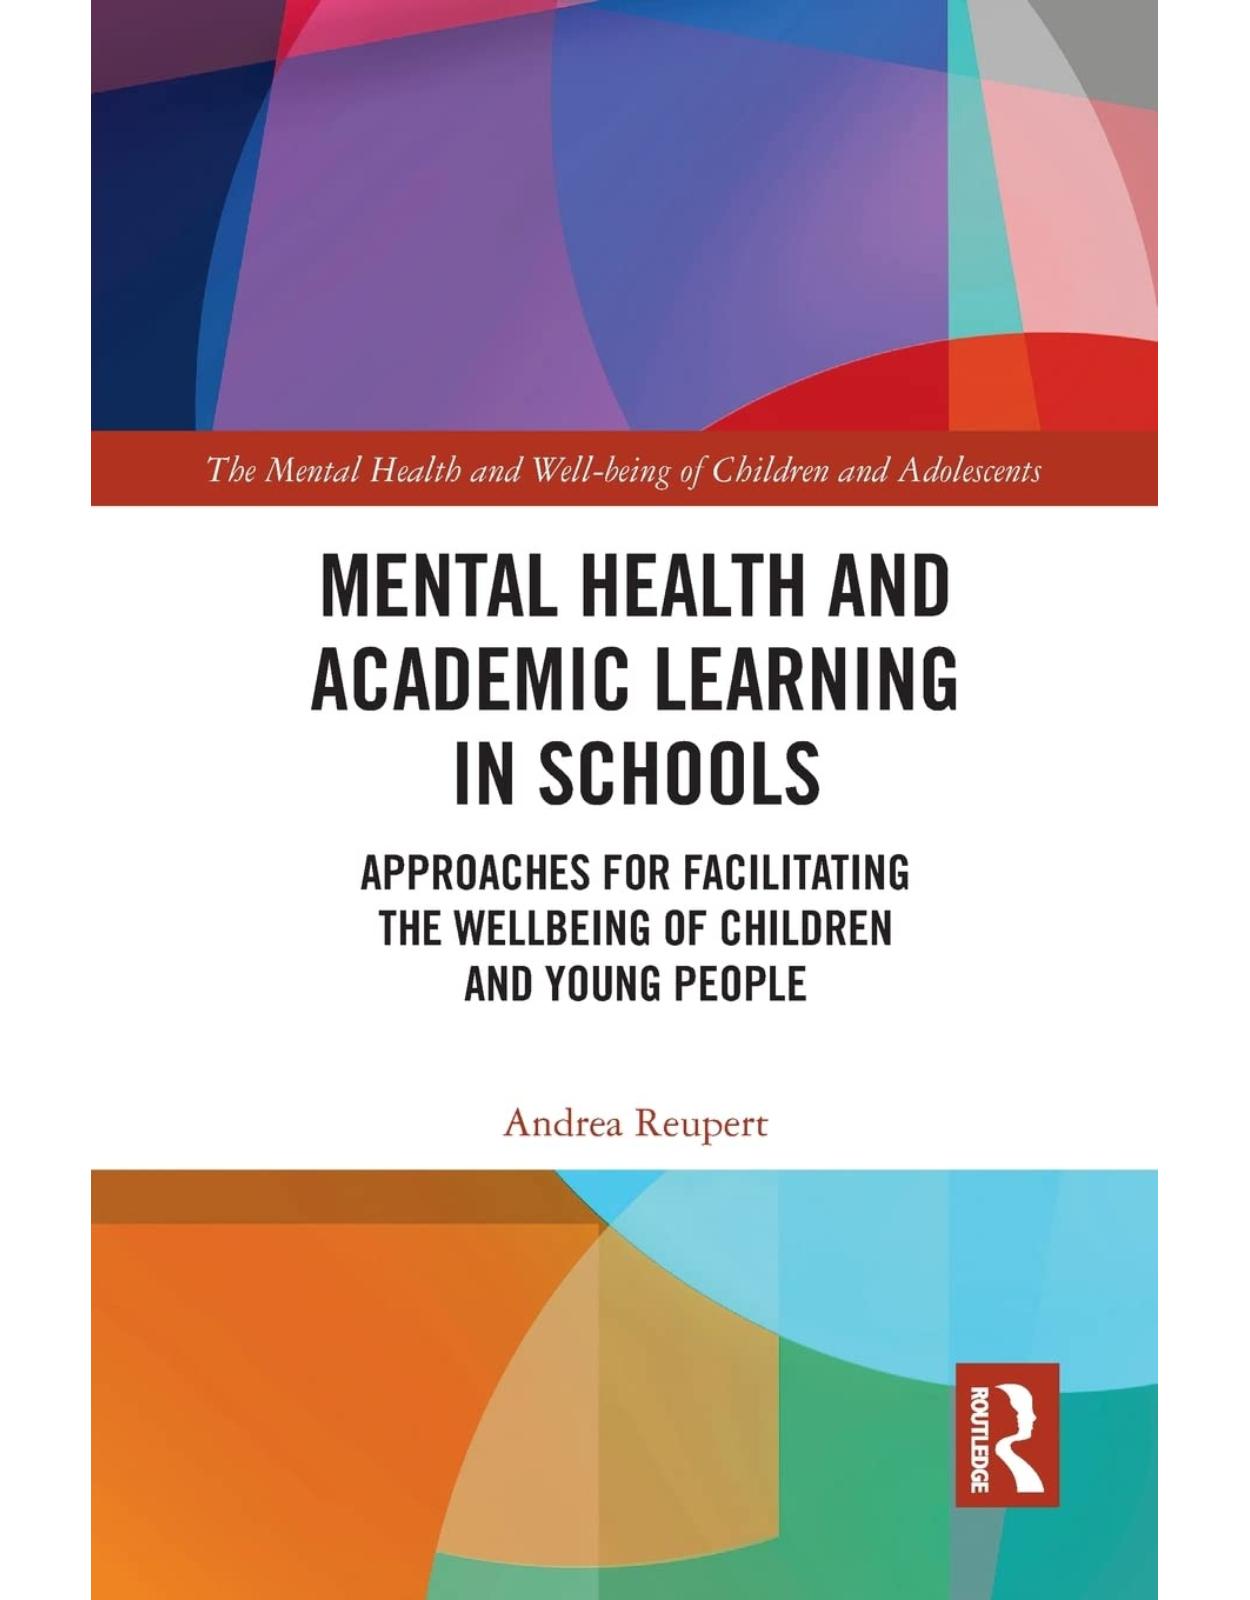 Mental Health and Academic Learning in Schools: Approaches for Facilitating the Wellbeing of Children and Young People